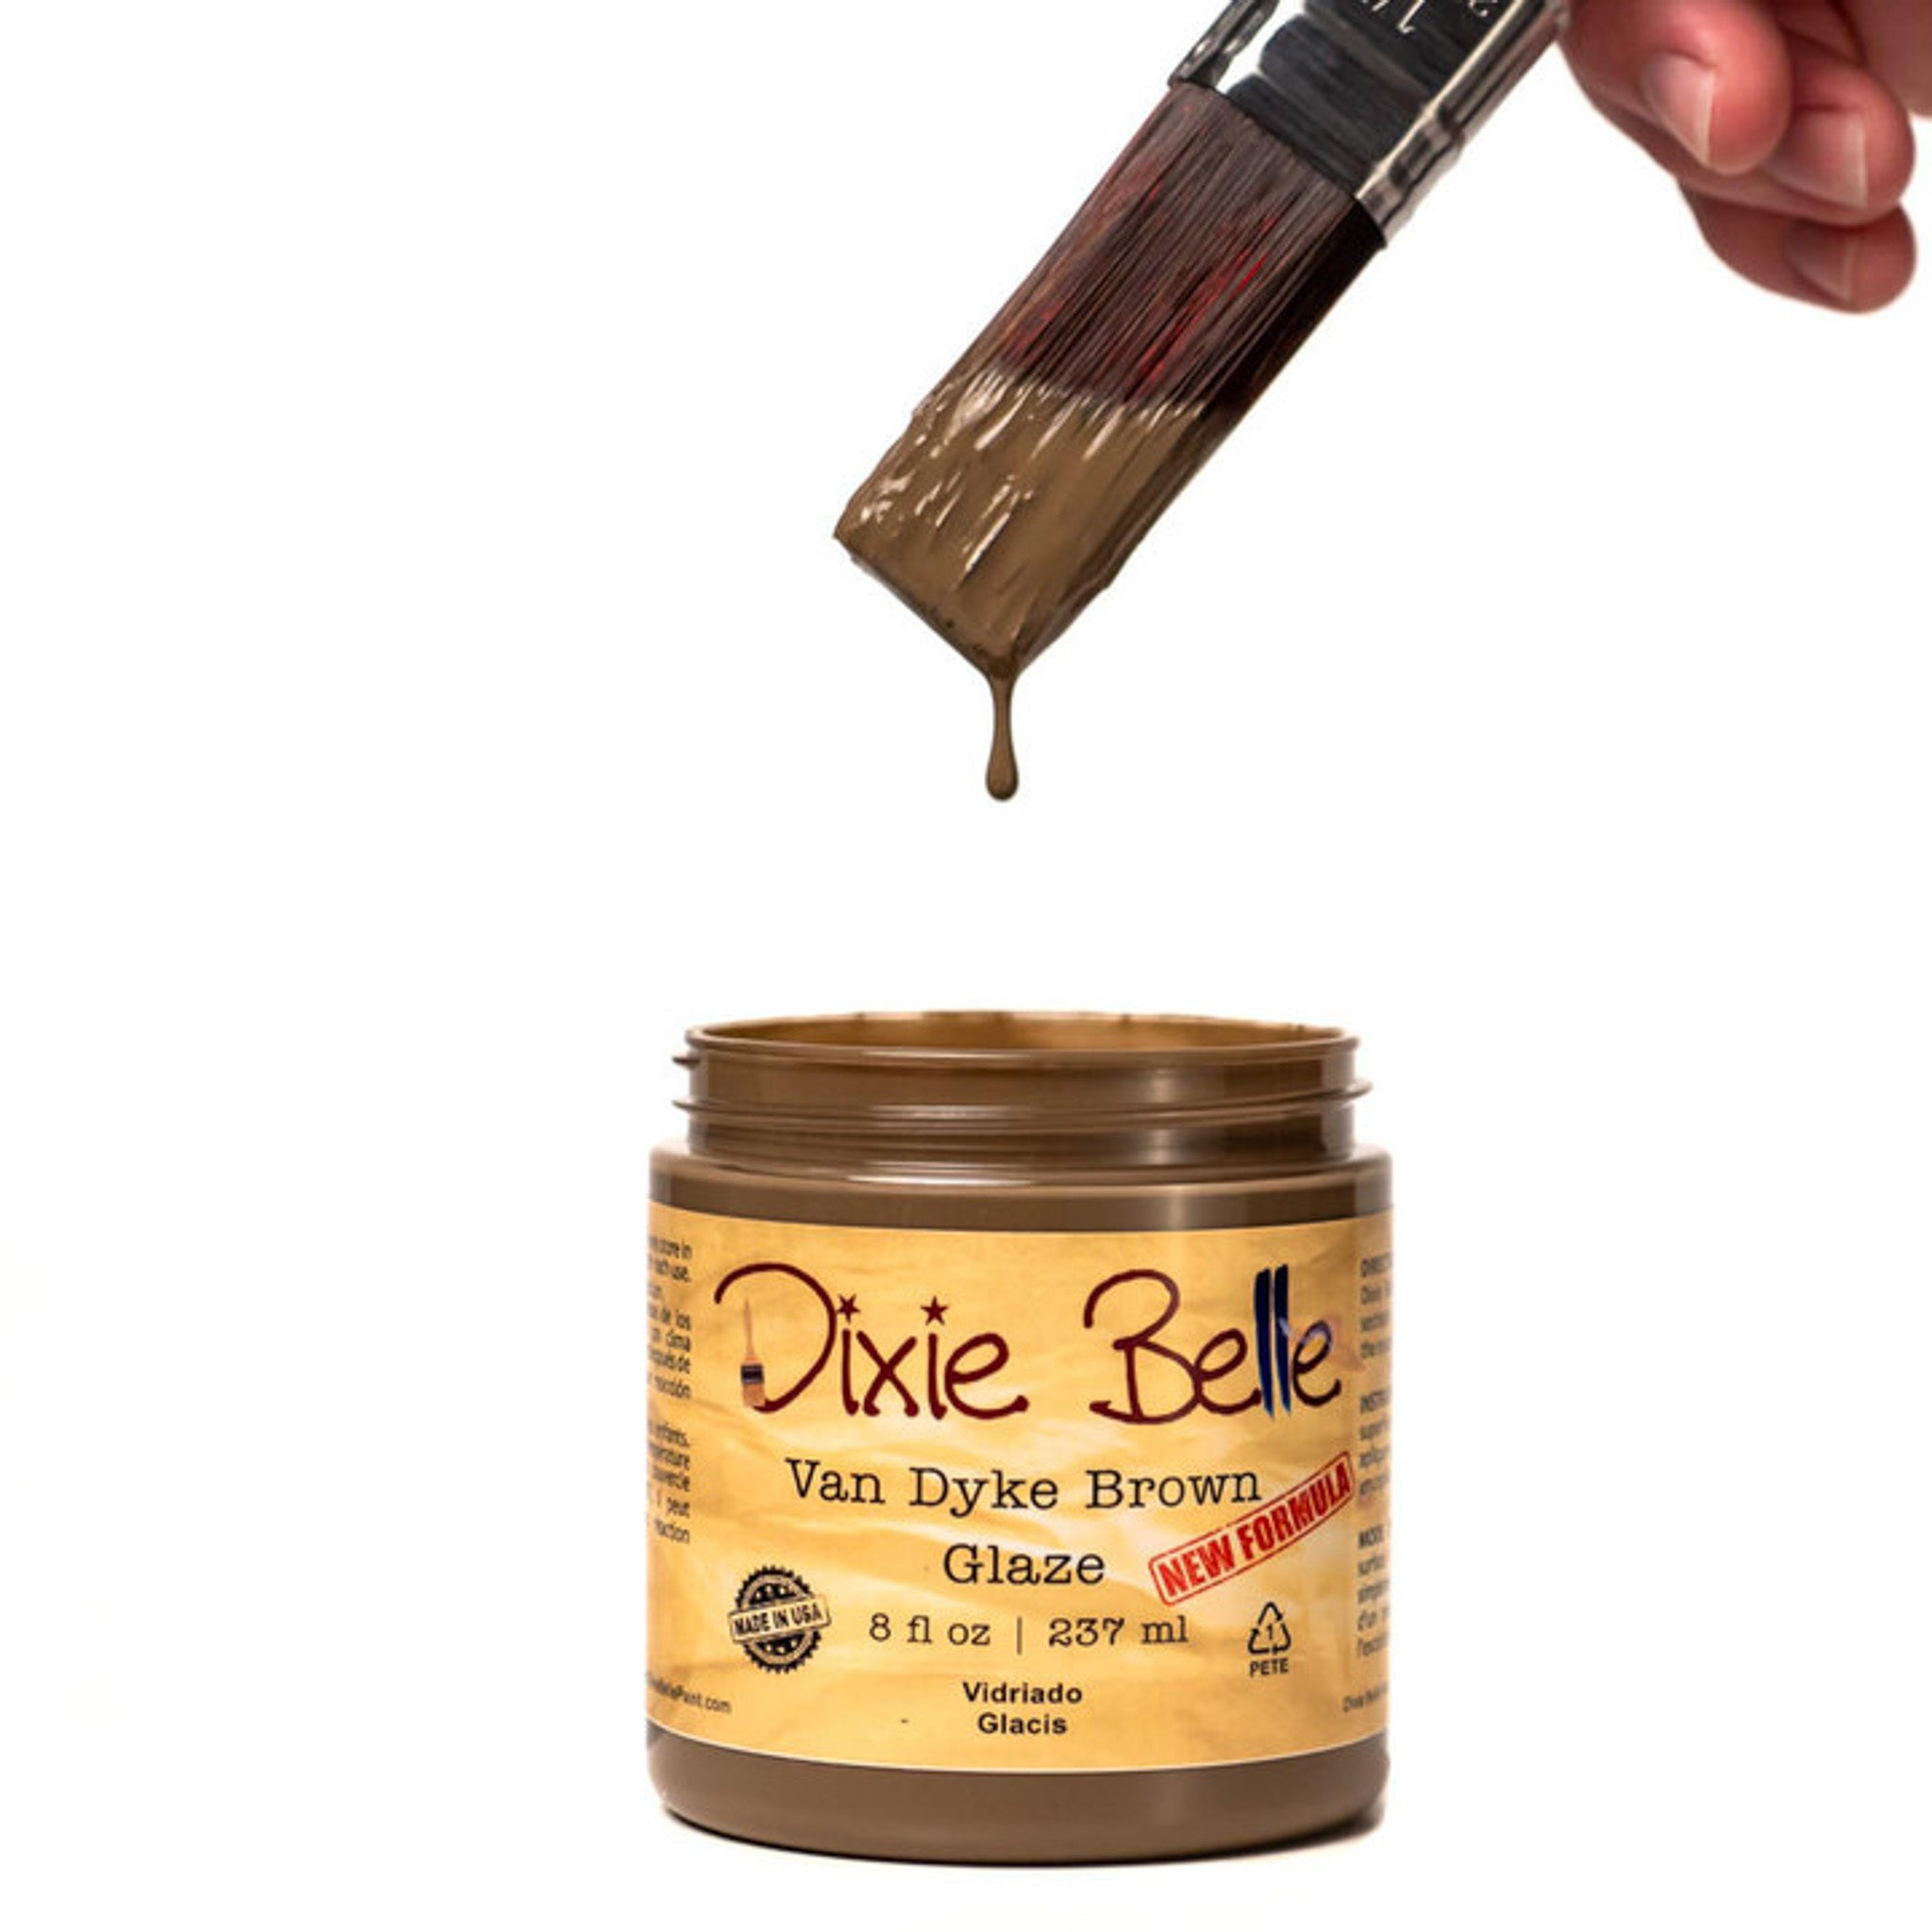 An open container of an 8oz/237ml Dixie Belle Van Dyke Brown Glaze with a dripping paintbrush above it is against a white background.